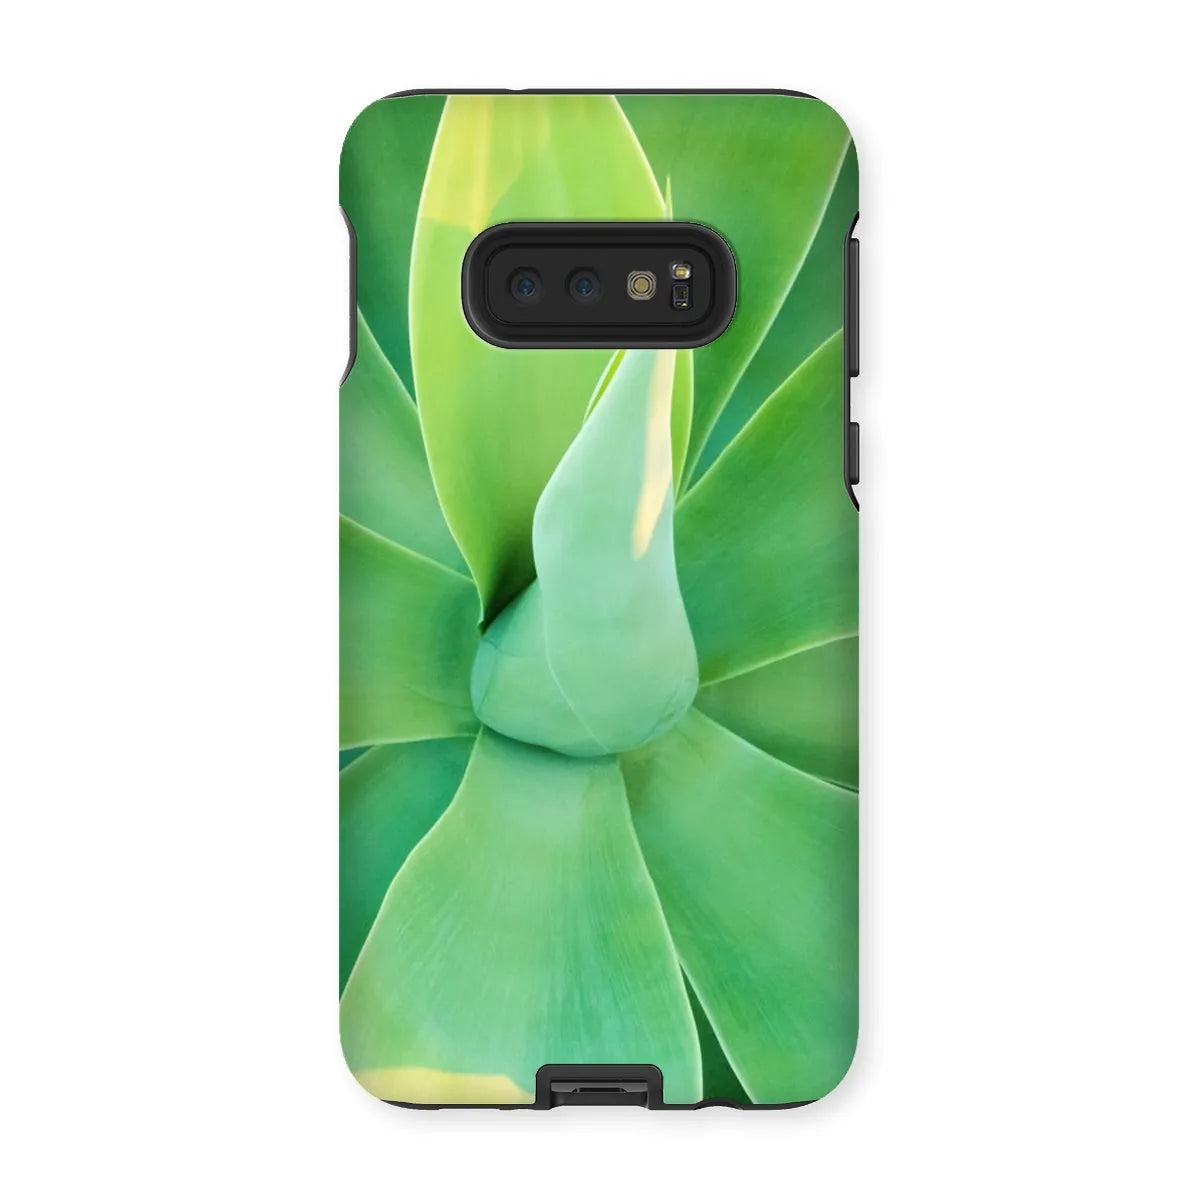 In Bloom Too Tough Phone Case - Samsung Galaxy S10e / Matte - Mobile Phone Cases - Aesthetic Art